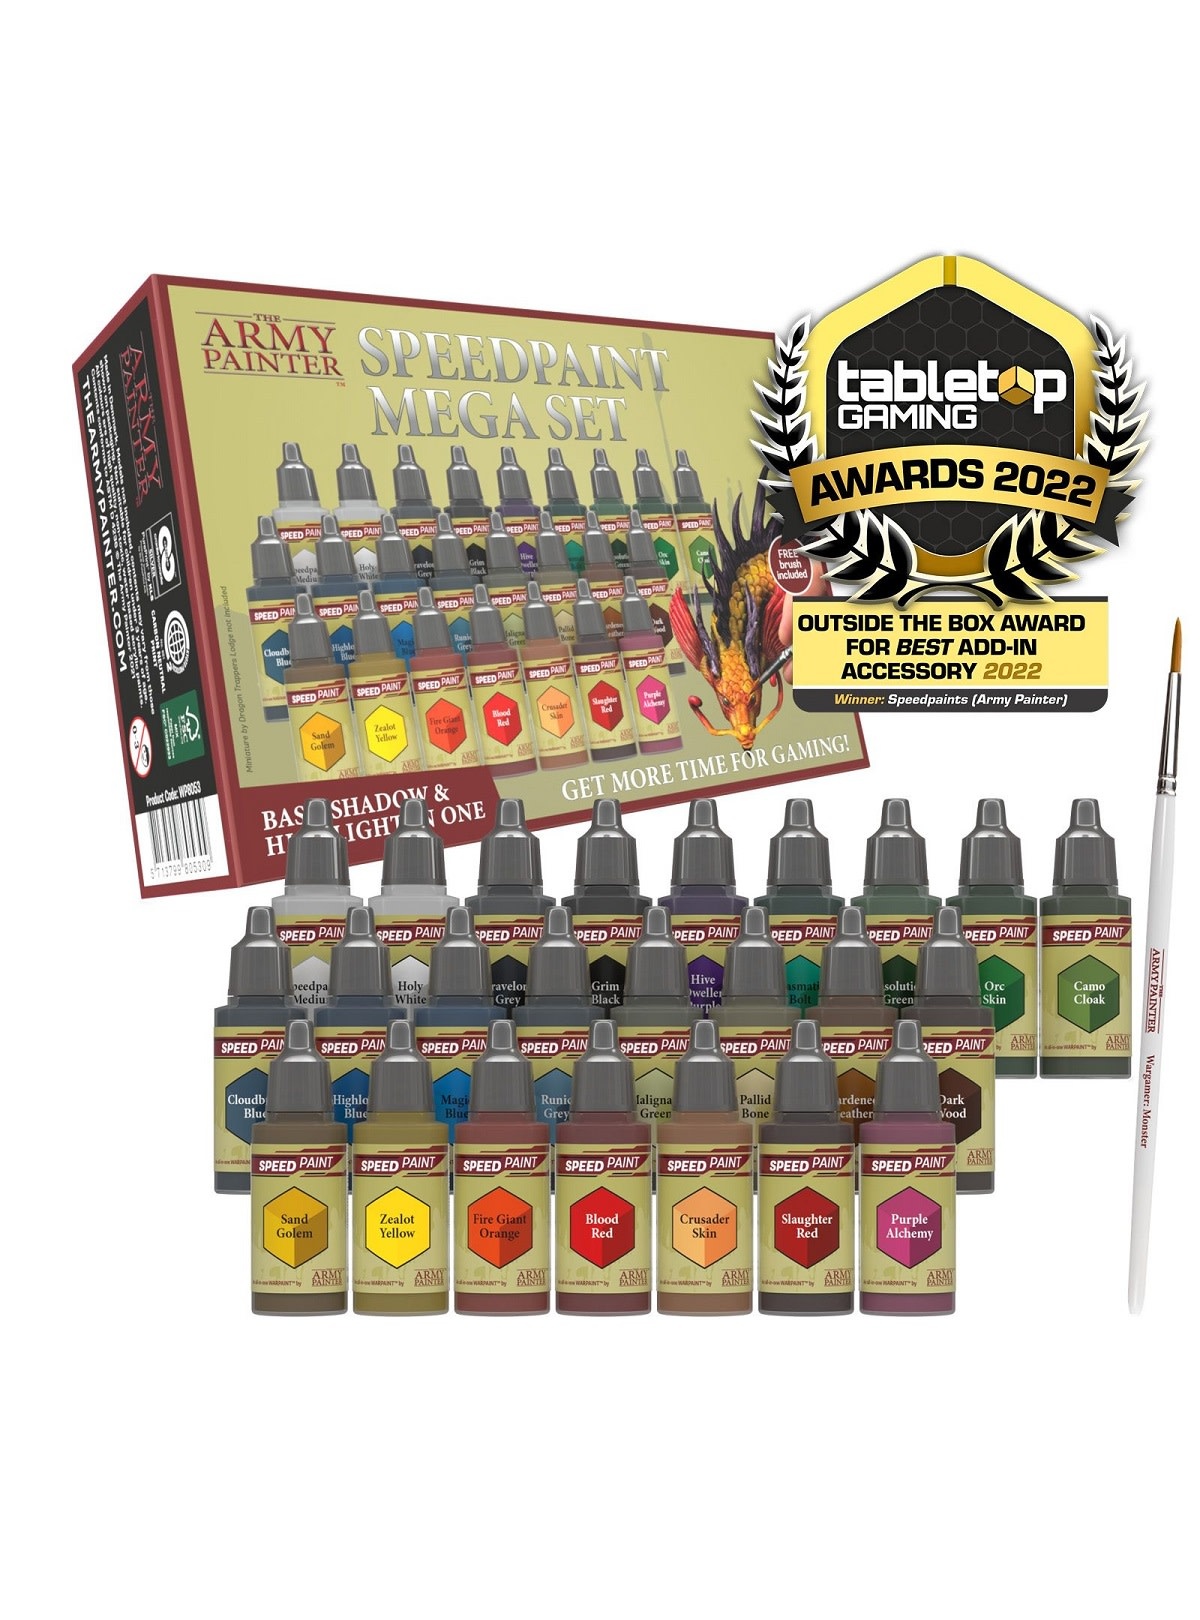 New Stock - Army Painter Speed Paint 2.0